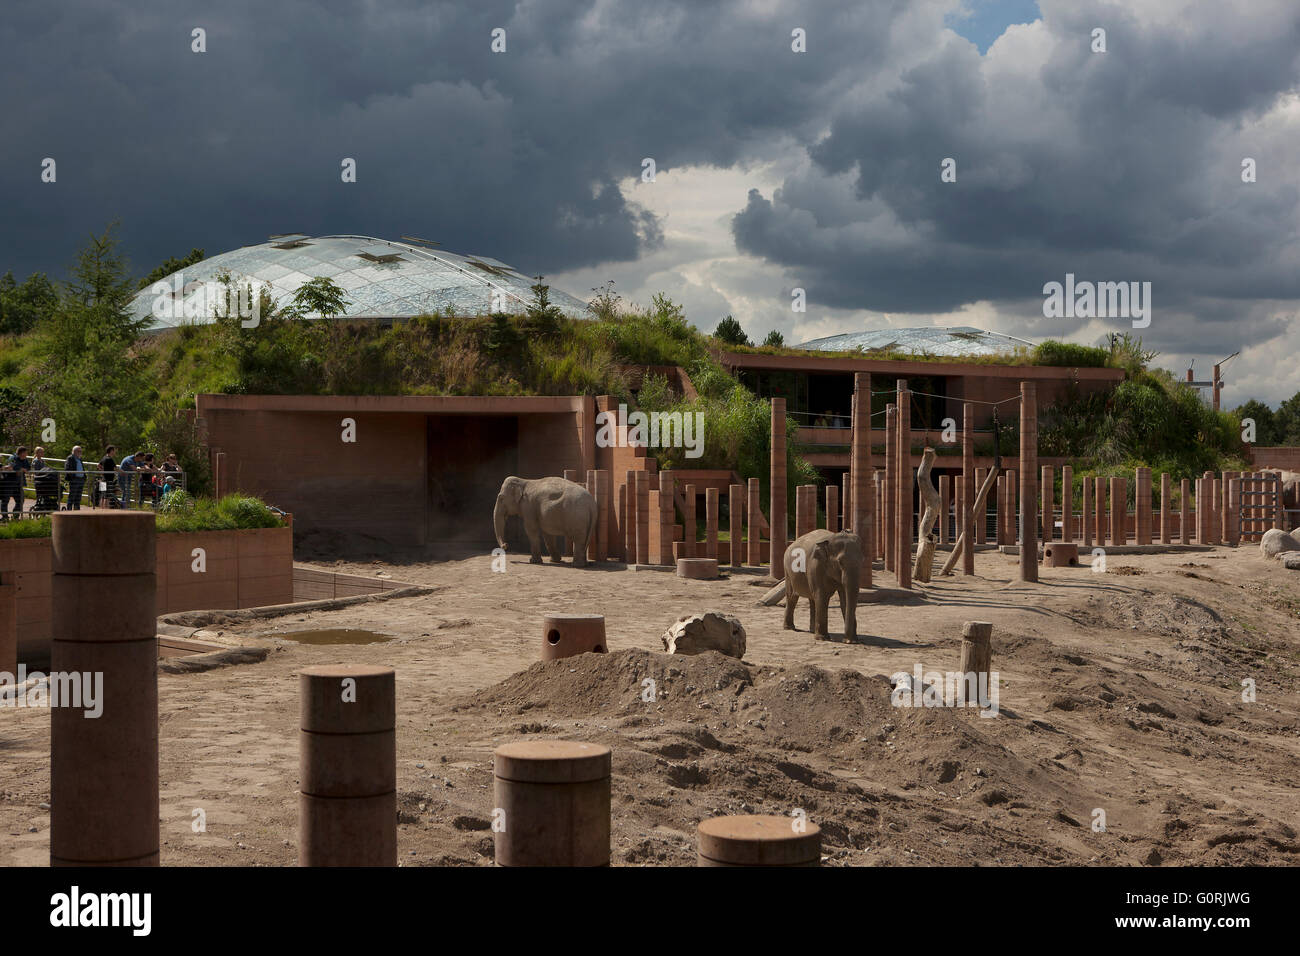 The Elephant House, Copenhagen Zoo. Elephants walking in sandy area. People looking at them from the other side of the railing. Stock Photo